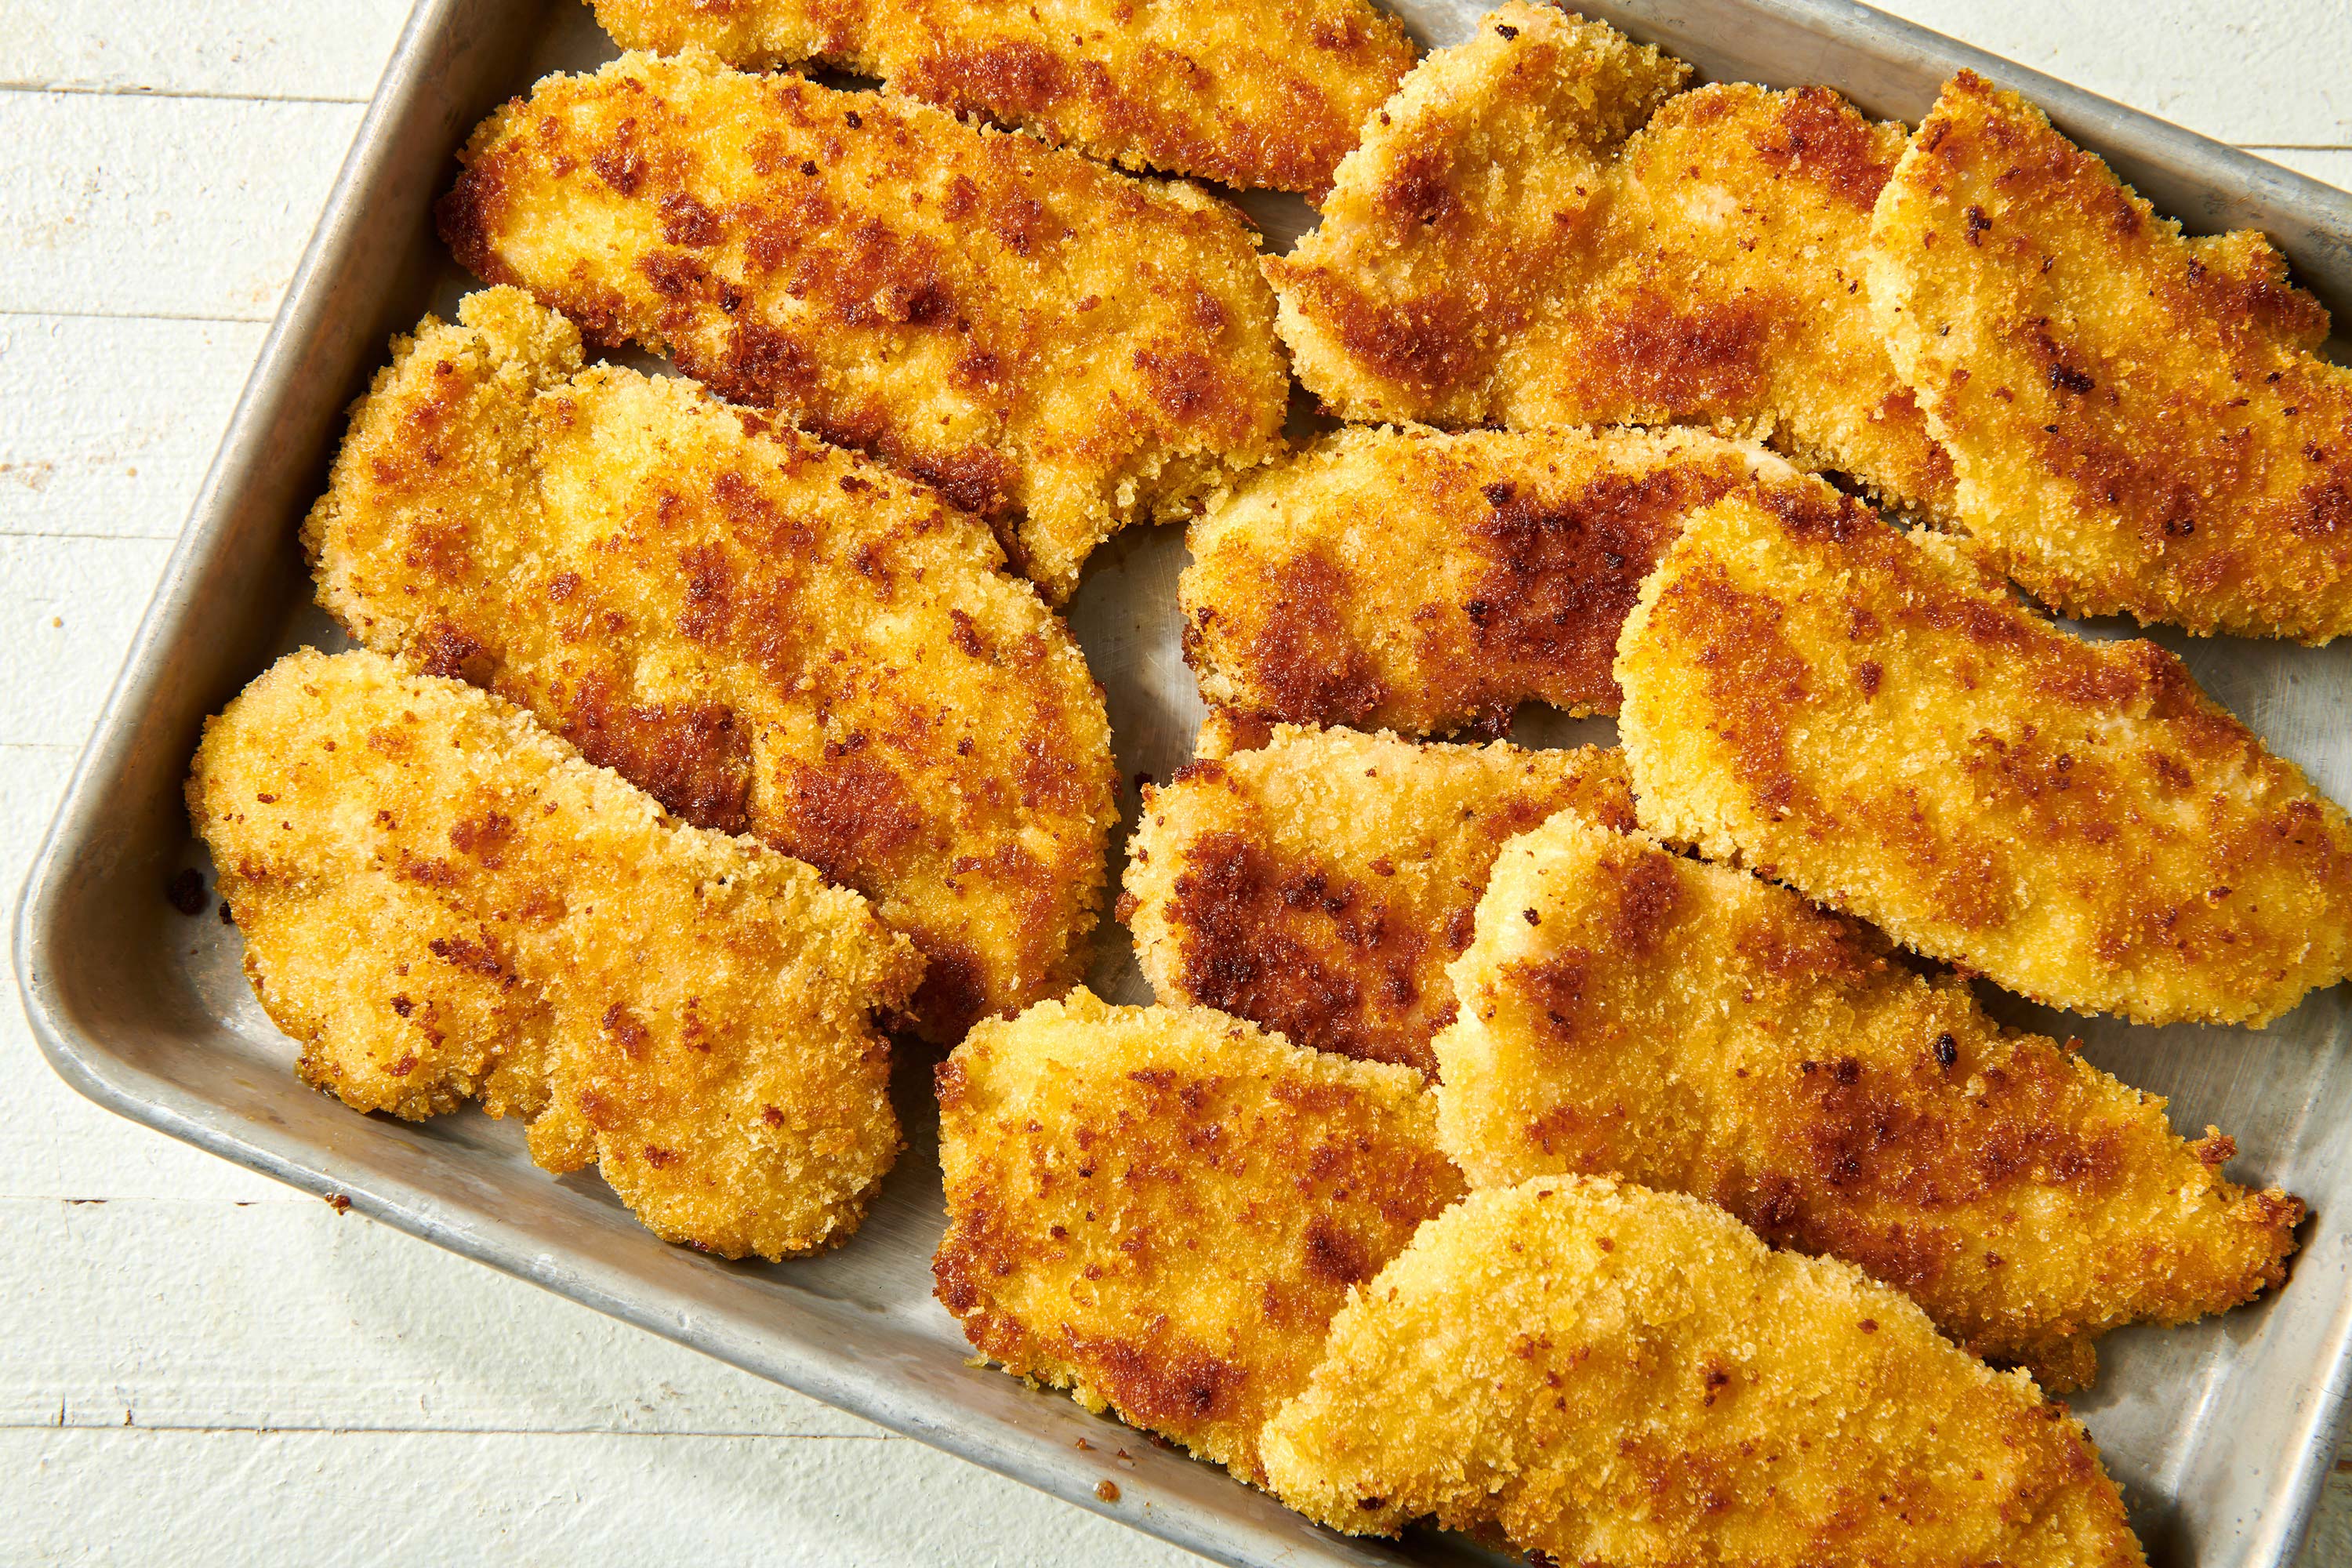 Baking sheet piled with breaded homemade Chicken Tenders.